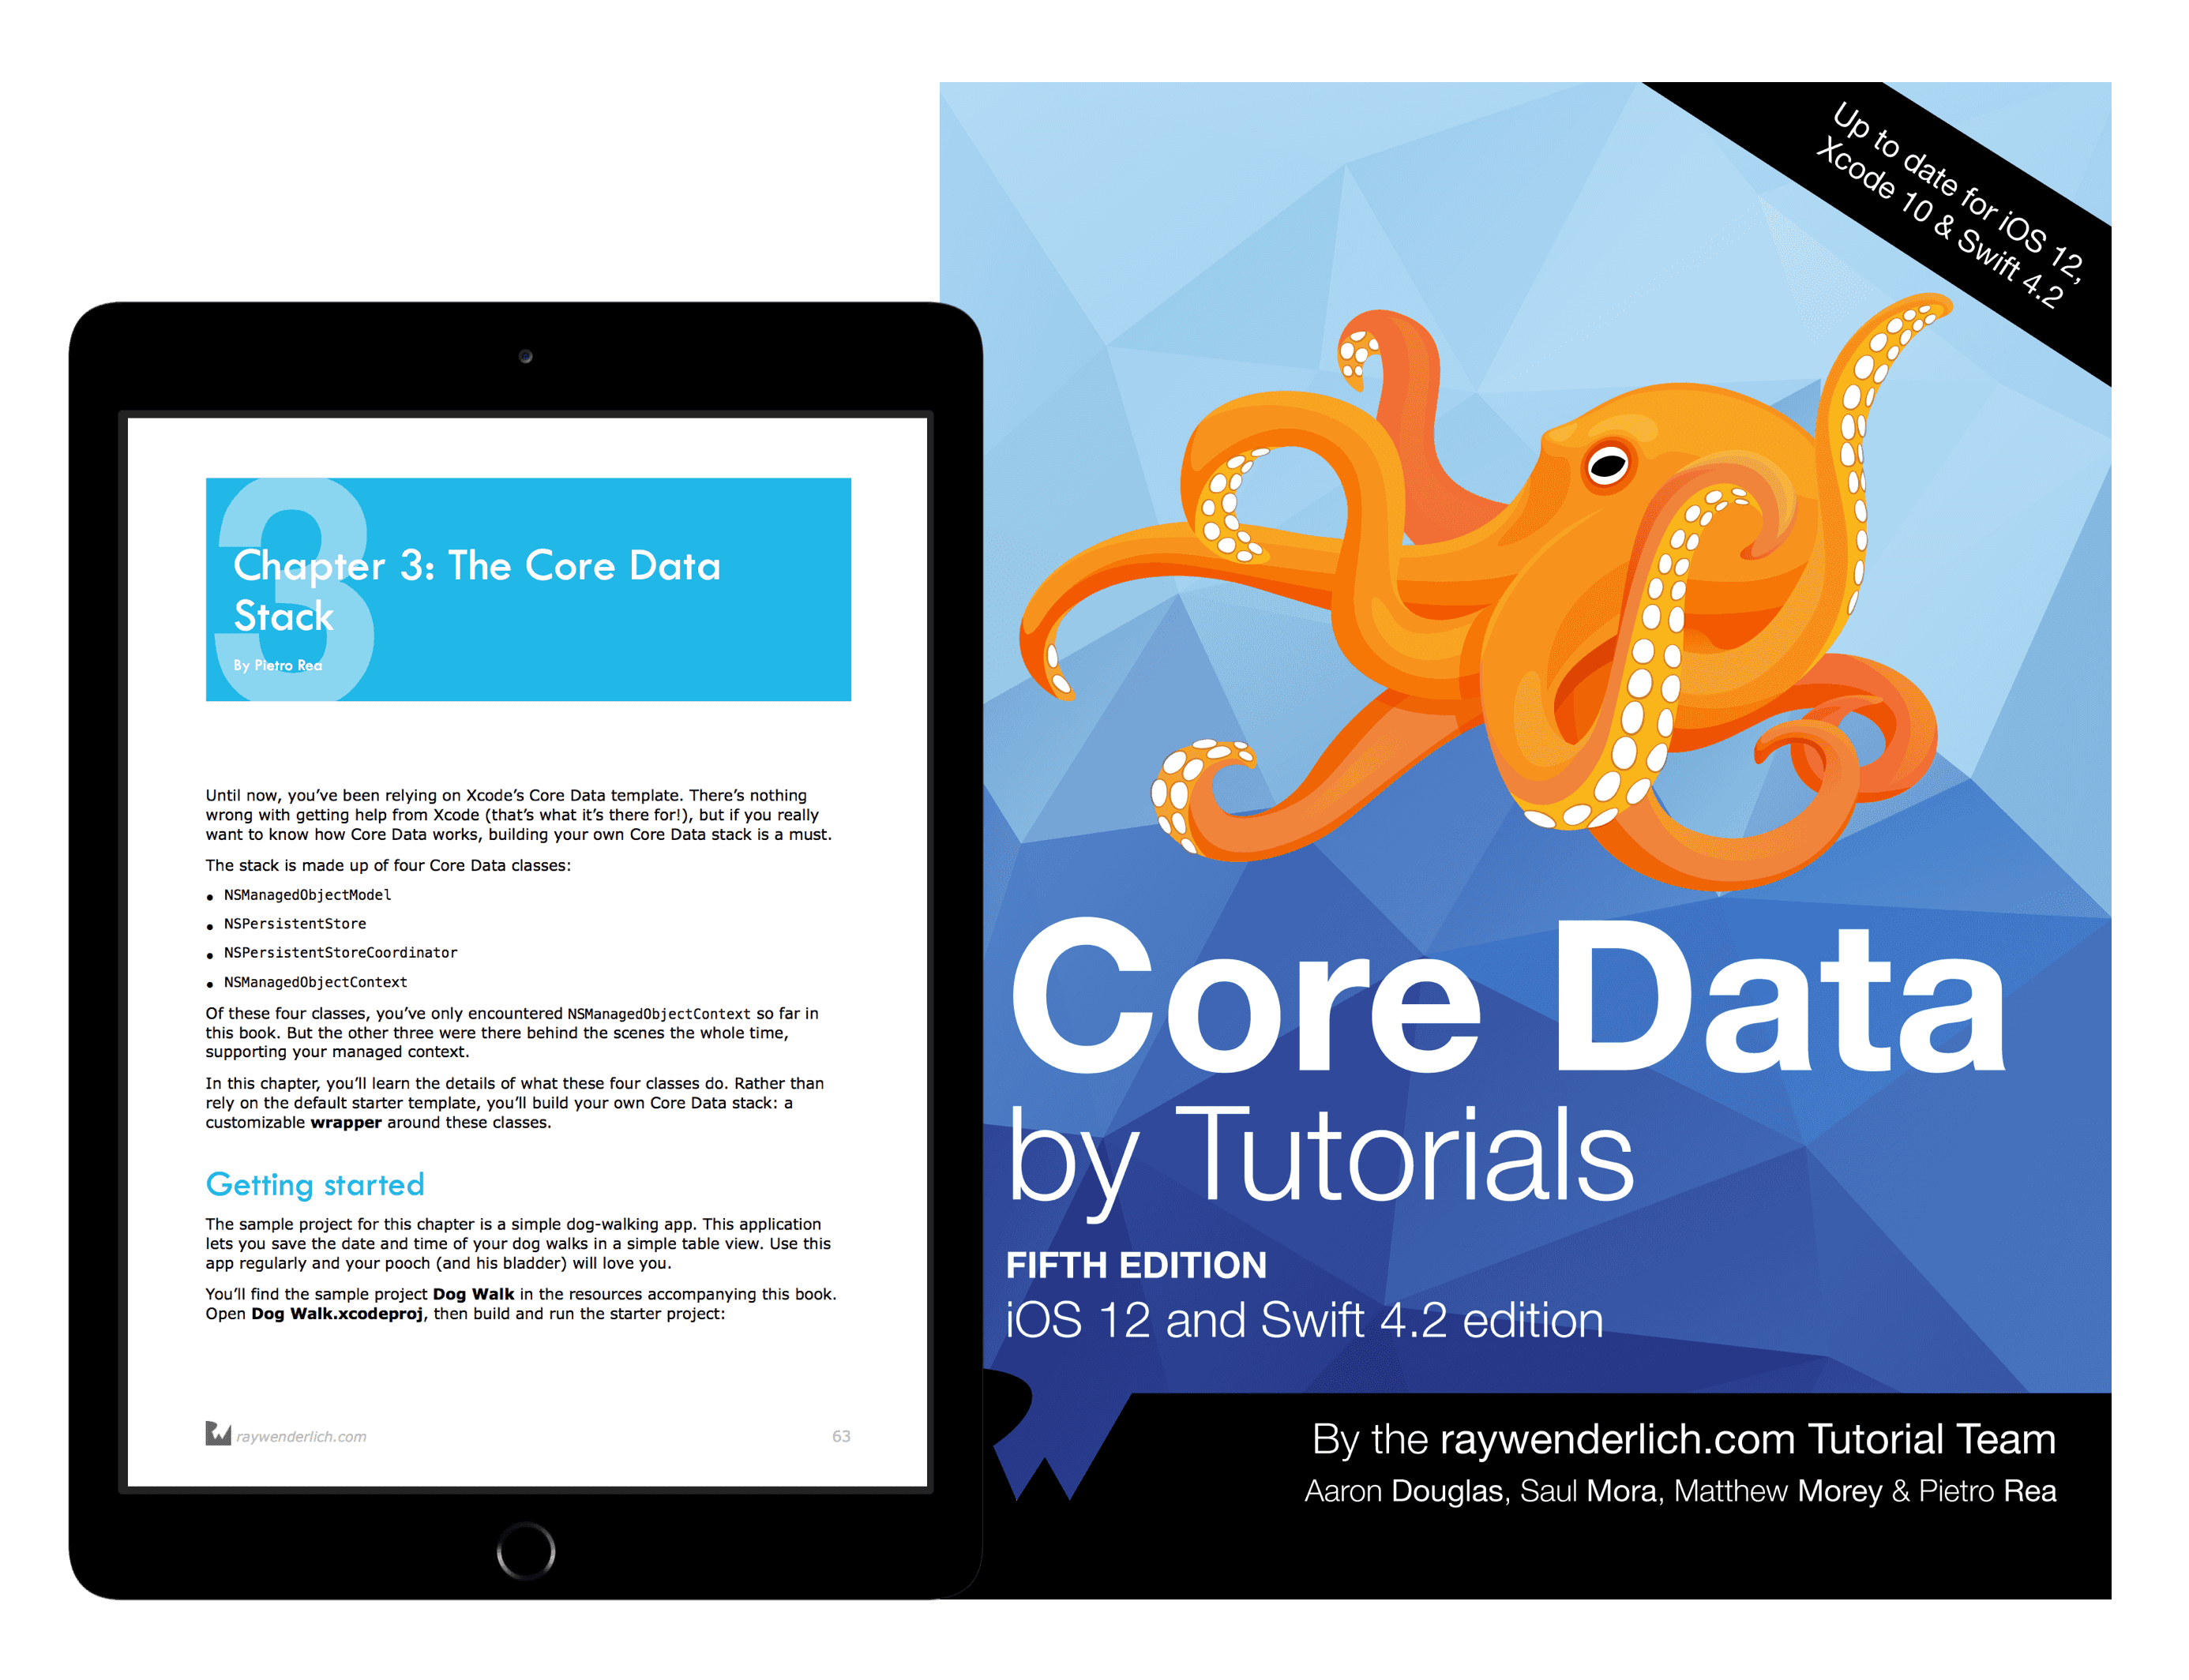 Core data by tutorials download